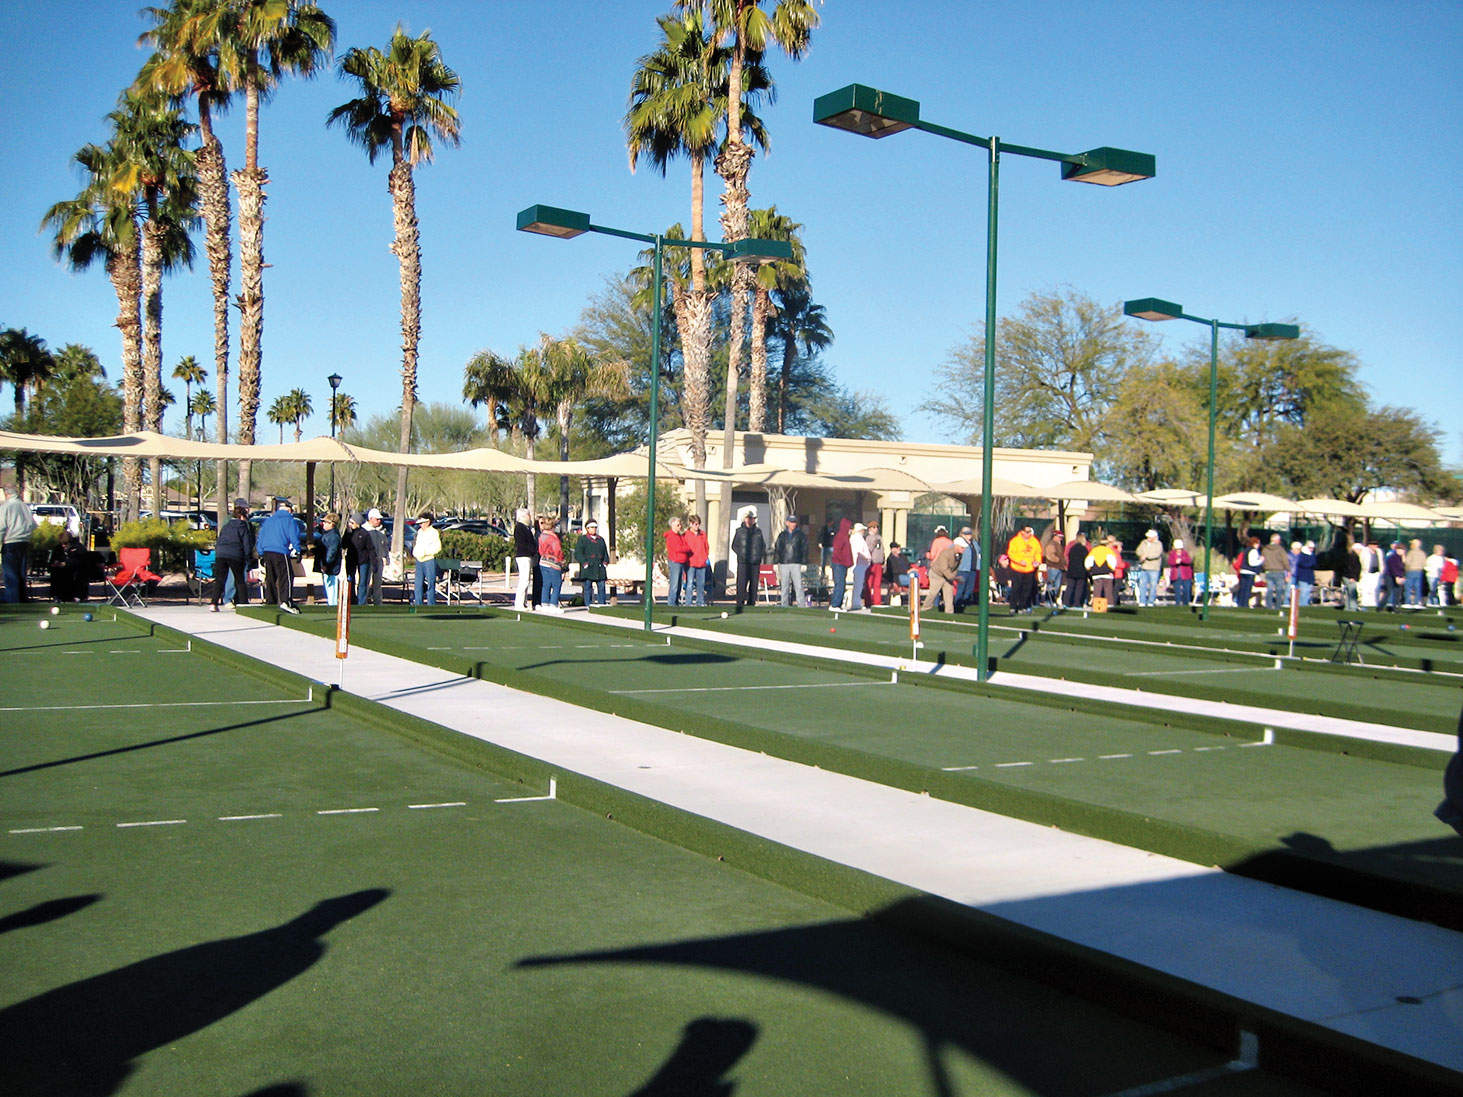 Temperatures may have dipped during the height of the Winter Season, but the cold weather did not deter avid Bocce Ball players from showing up for Day and Night League competition. Regular Winter Season play ends on March 11.